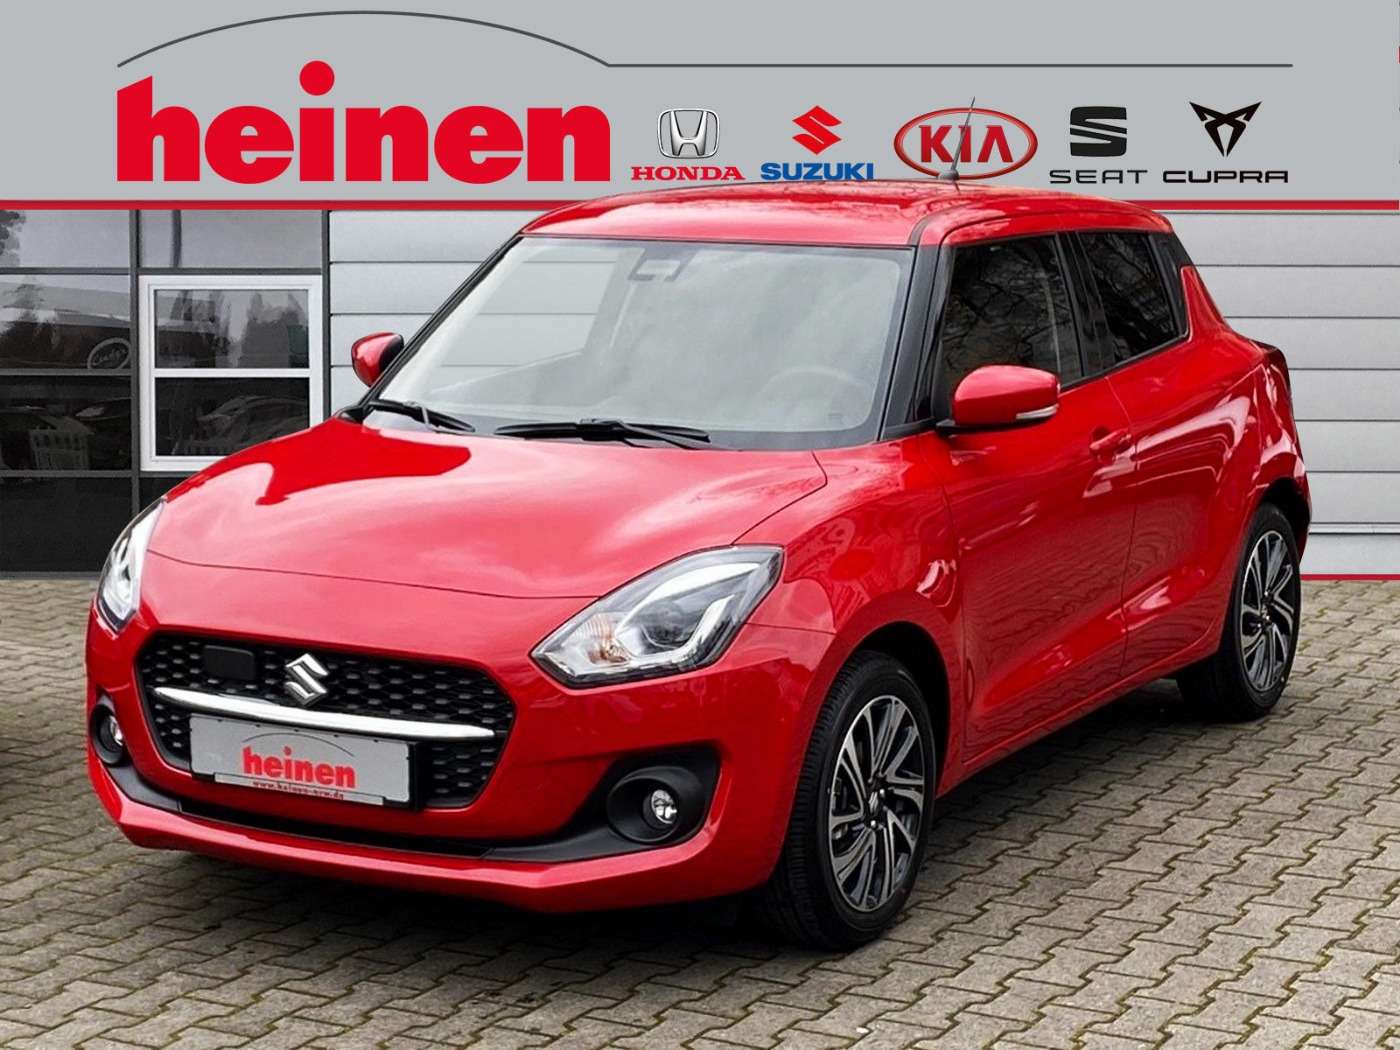 Suzuki Swift Compact in Red new in Holzwickede for € 16,580.-